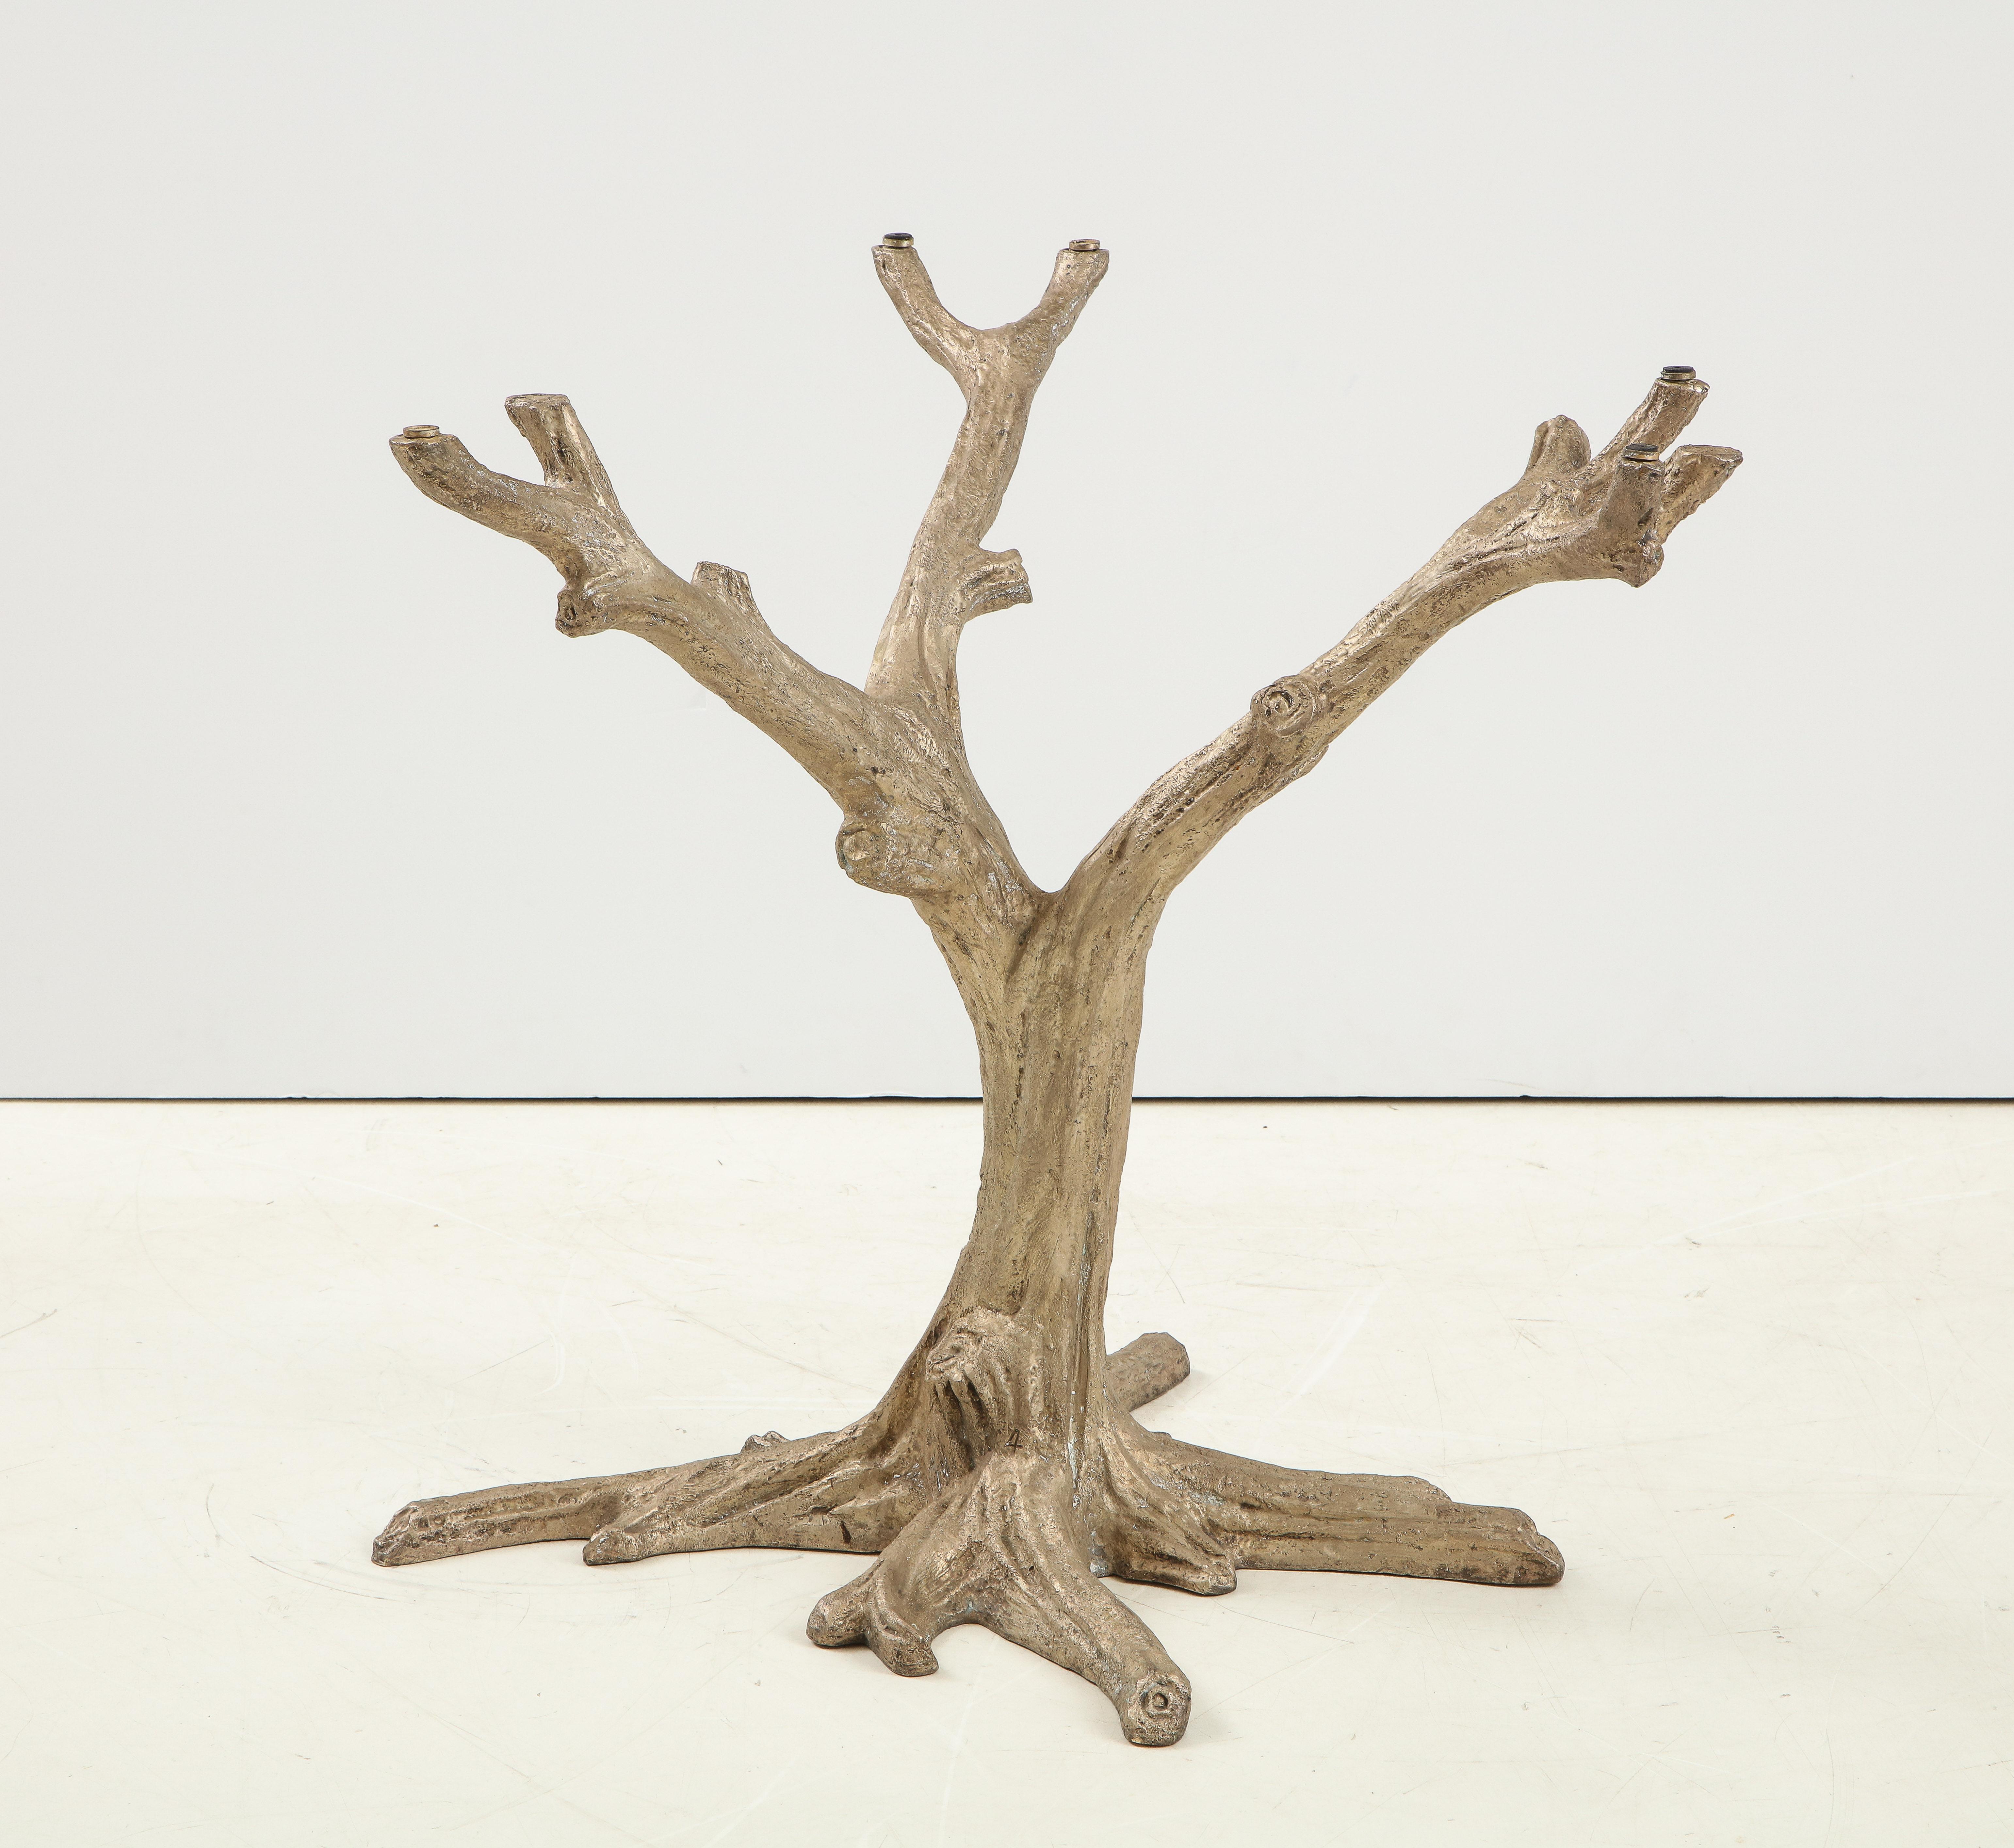 Striking aged silver toned bronze table base in a stylized tree form with branch supports. Can support a top up to 54